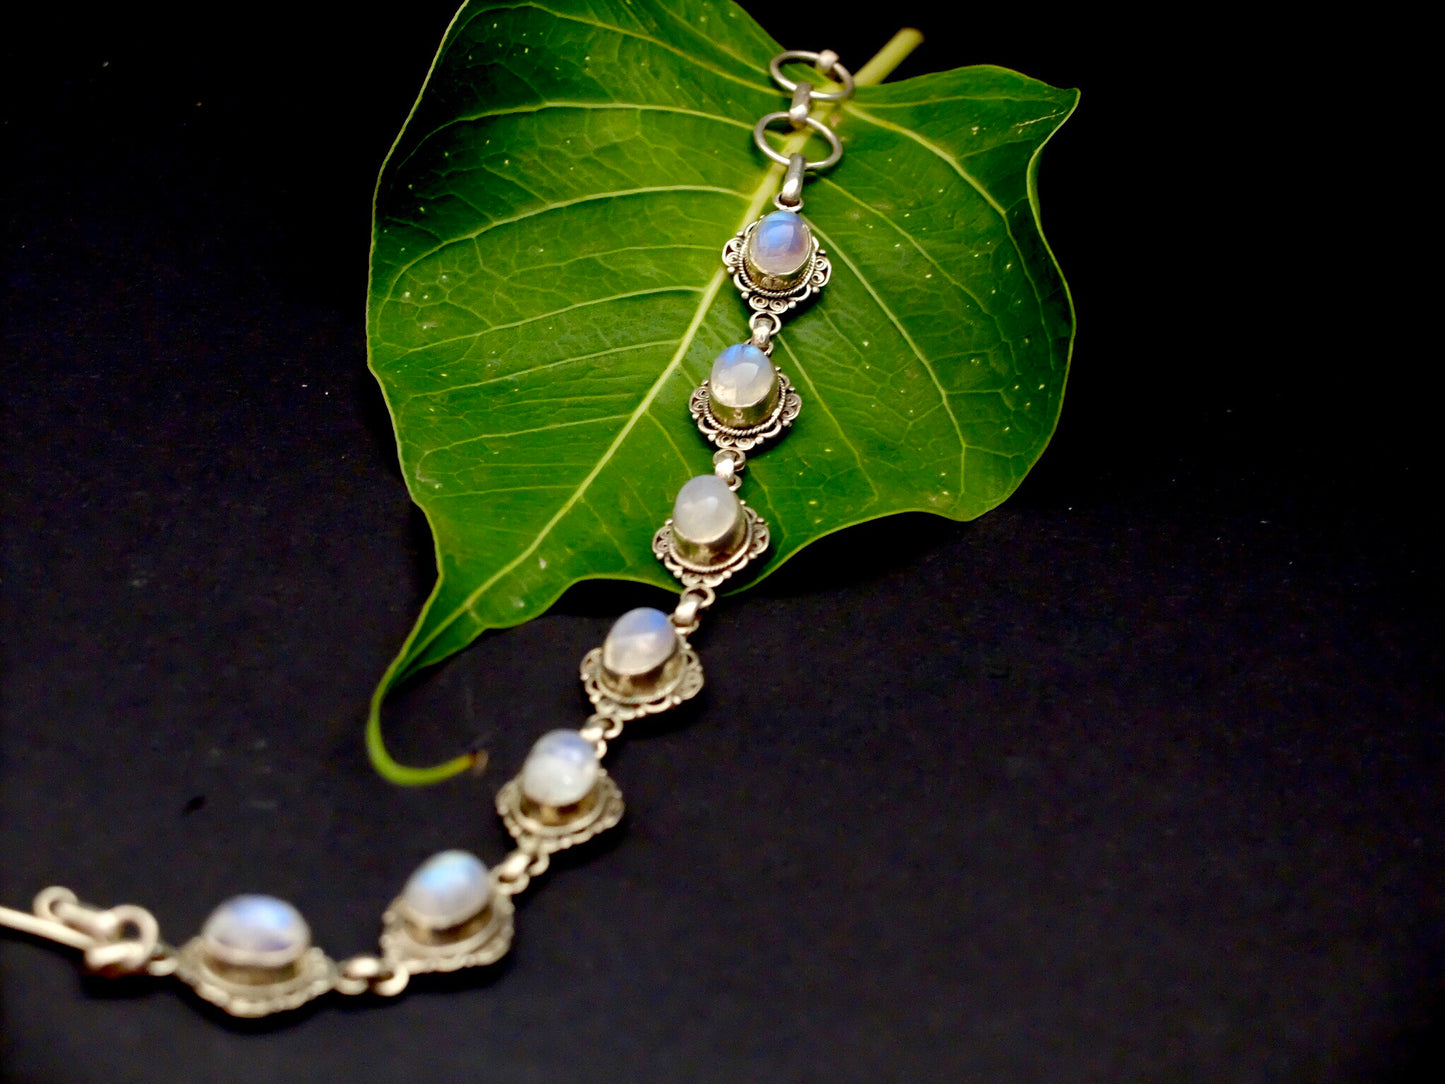 Moonstone and Silver chain bracelet